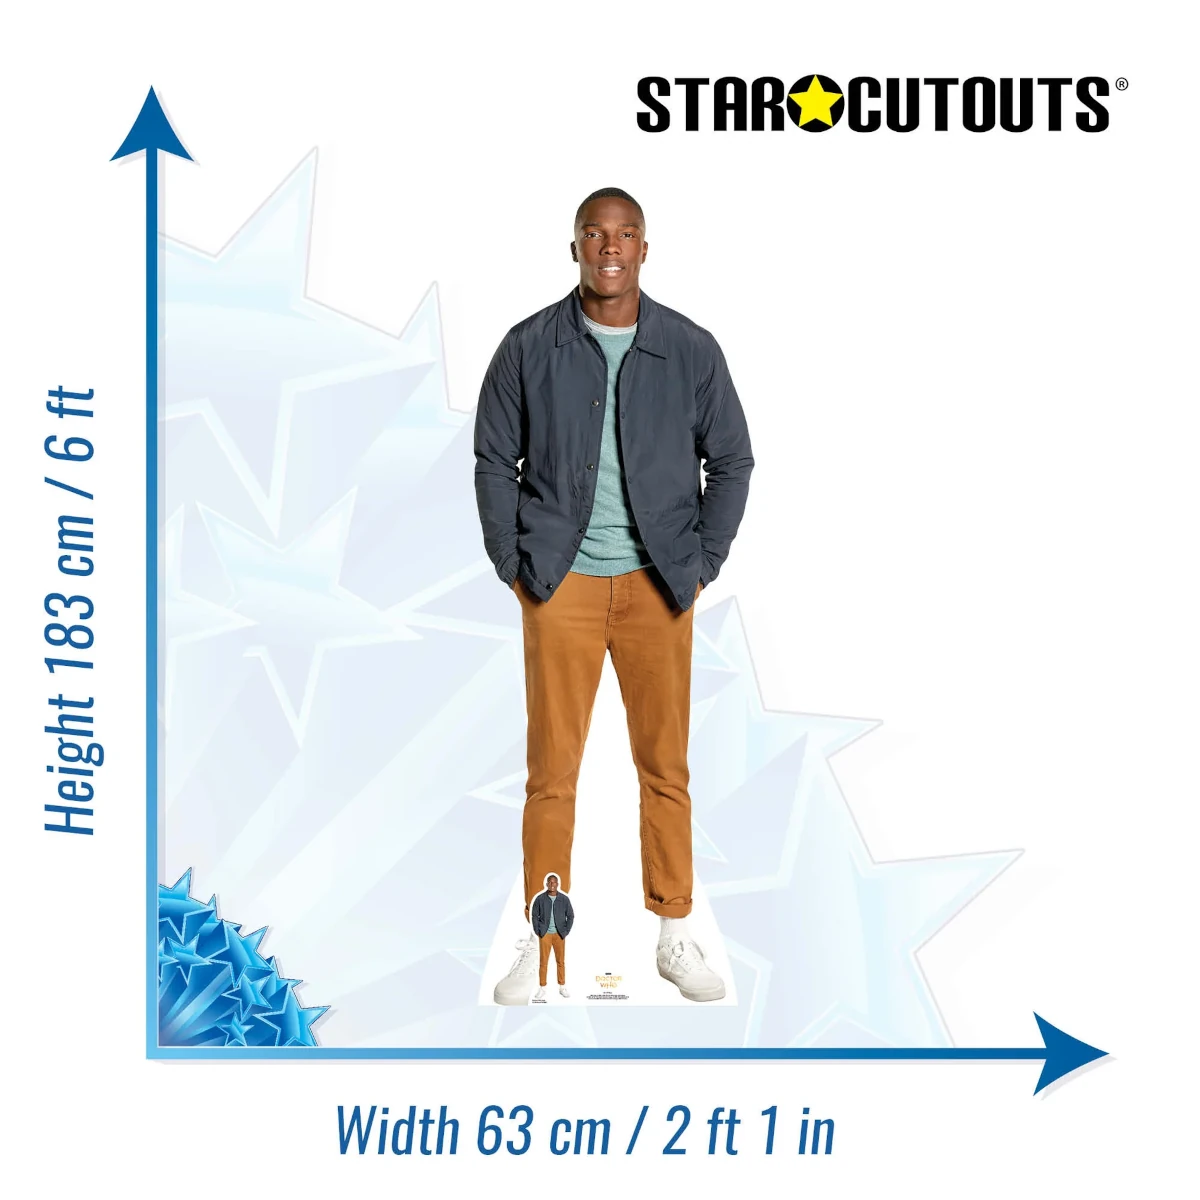 SC1199 Ryan Sinclair 'Tosin Cole' (Doctor Who) Official Lifesize + Mini Cardboard Cutout Standee Size